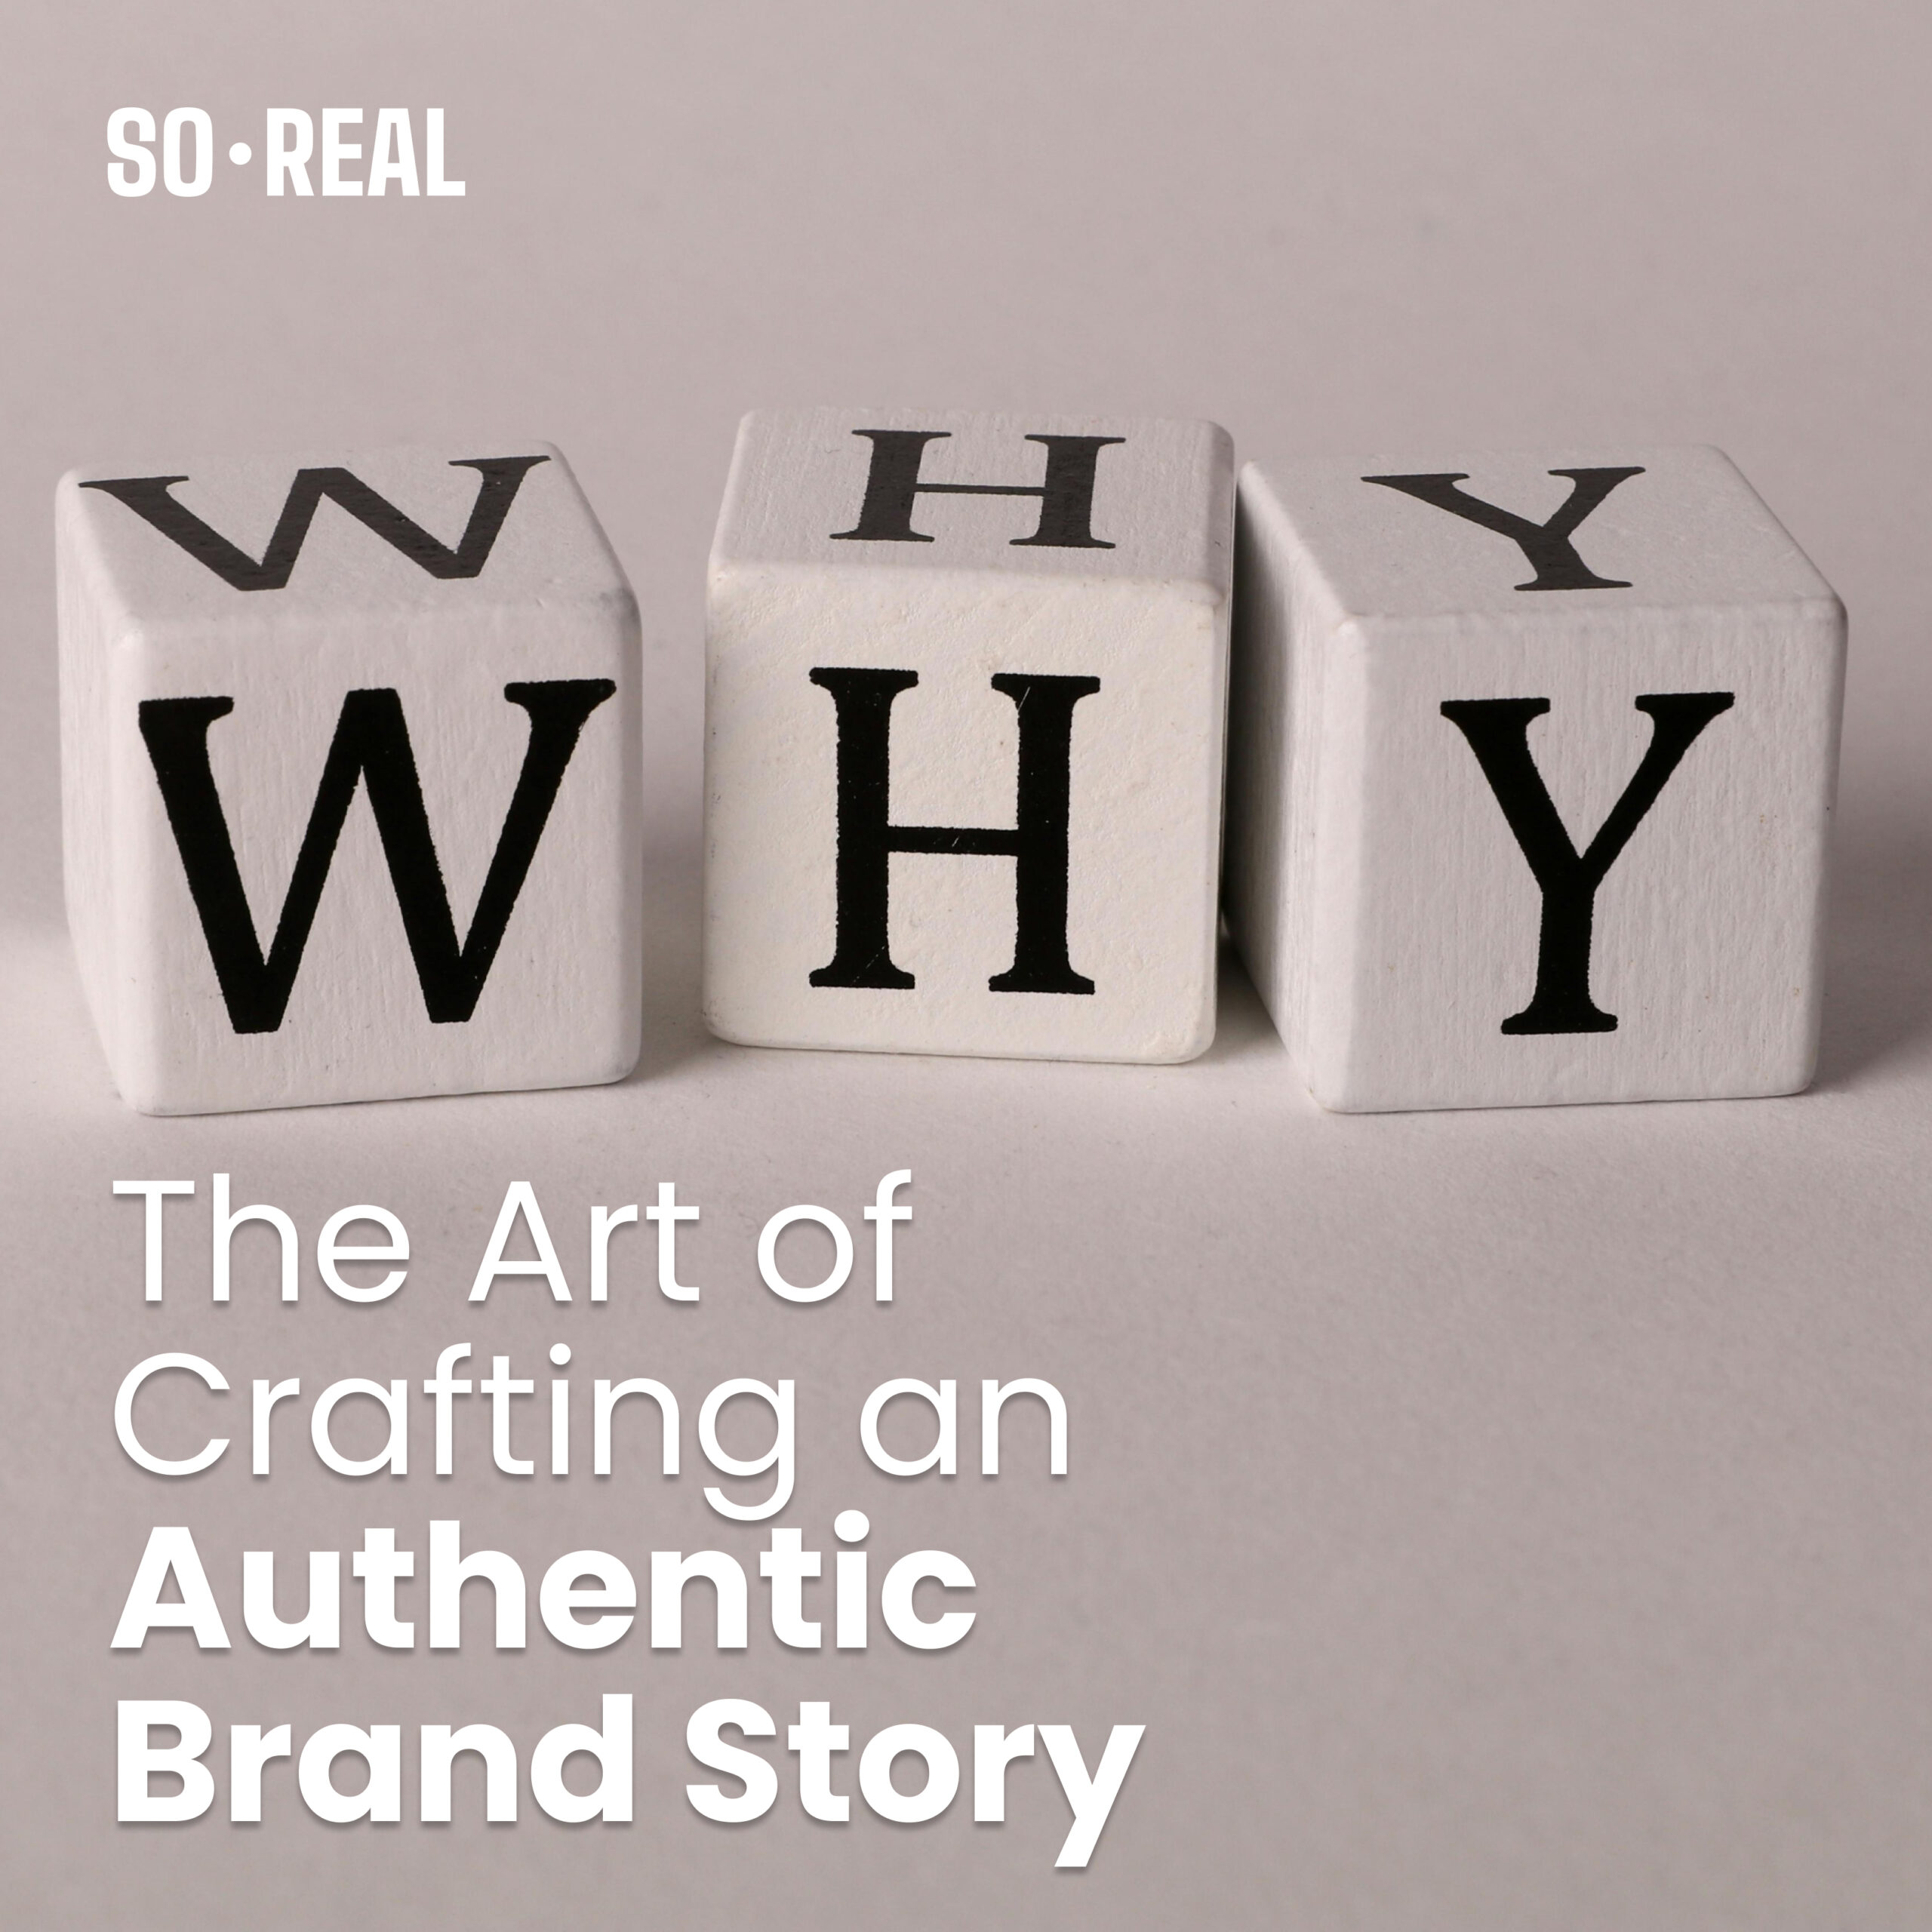 The Art of Crafting an Authentic Brand Story